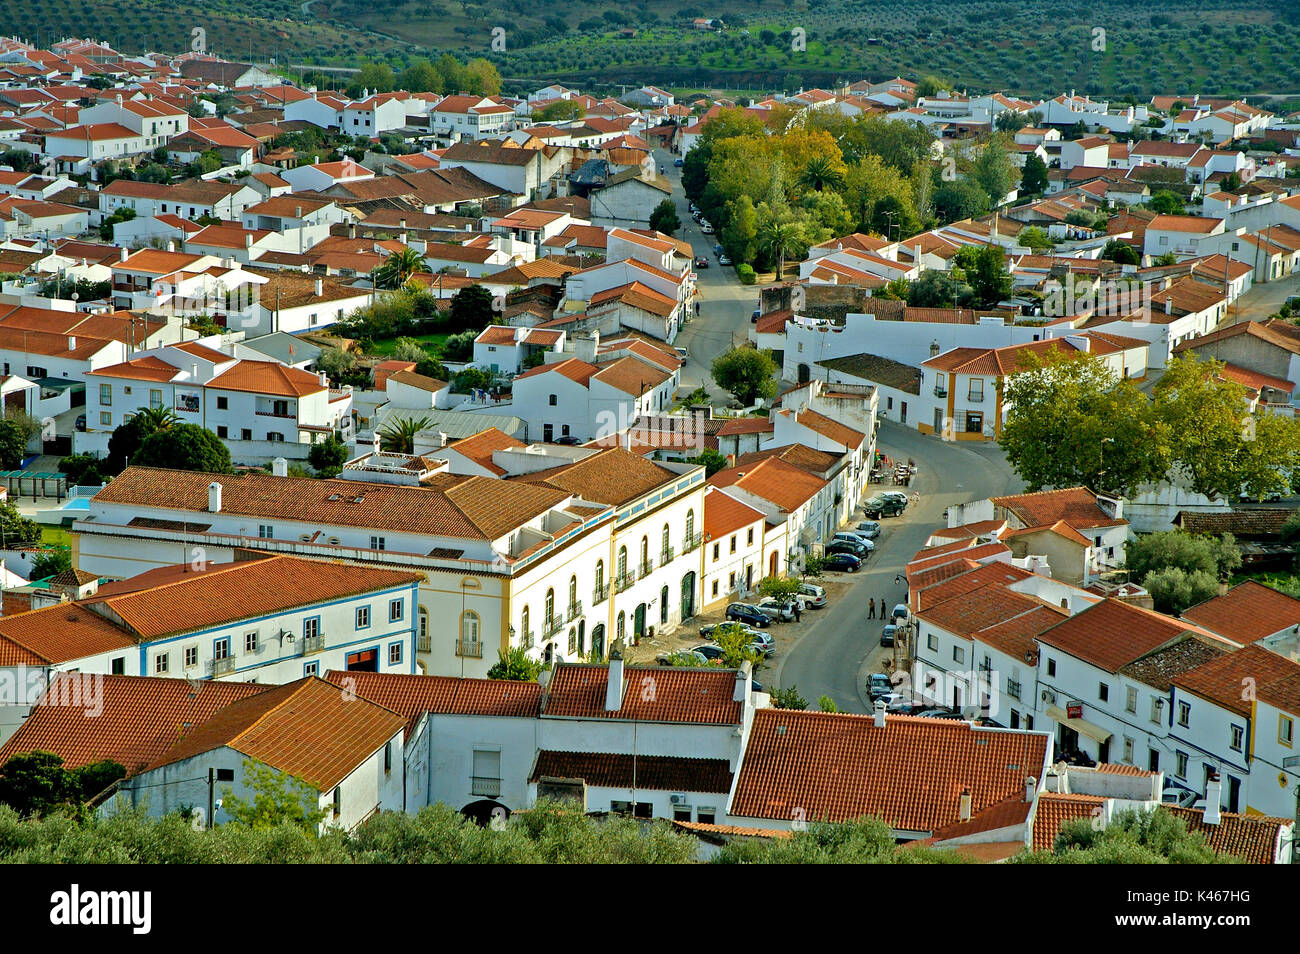 The traditional village of Portel with white houses, Alentejo, Portugal Stock Photo